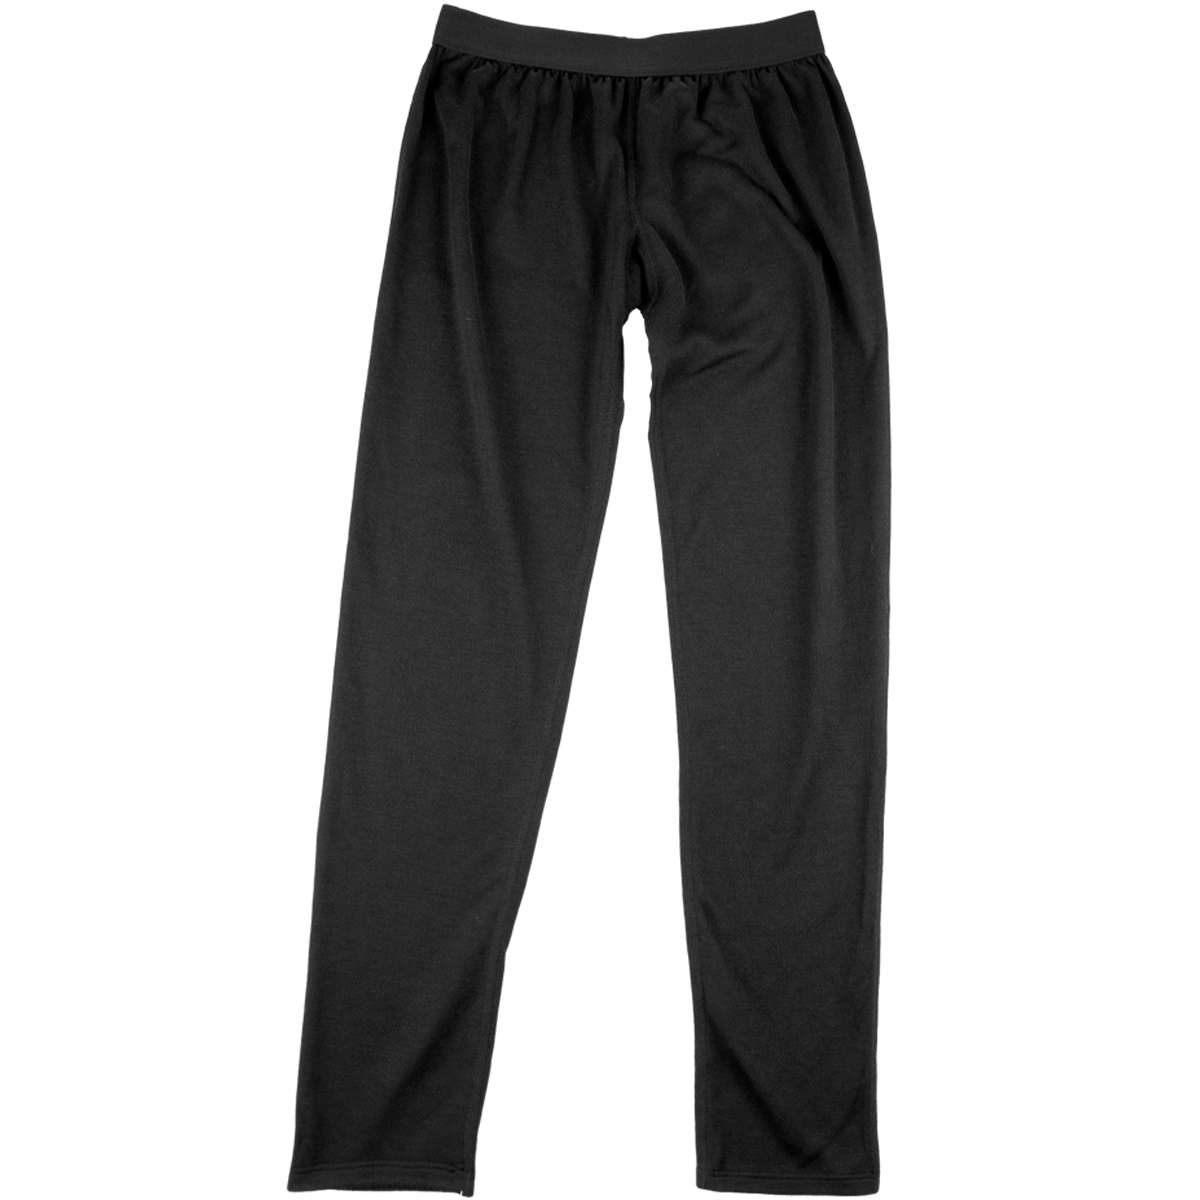 Sports Basement Youth Double Layer Bottom alternate view